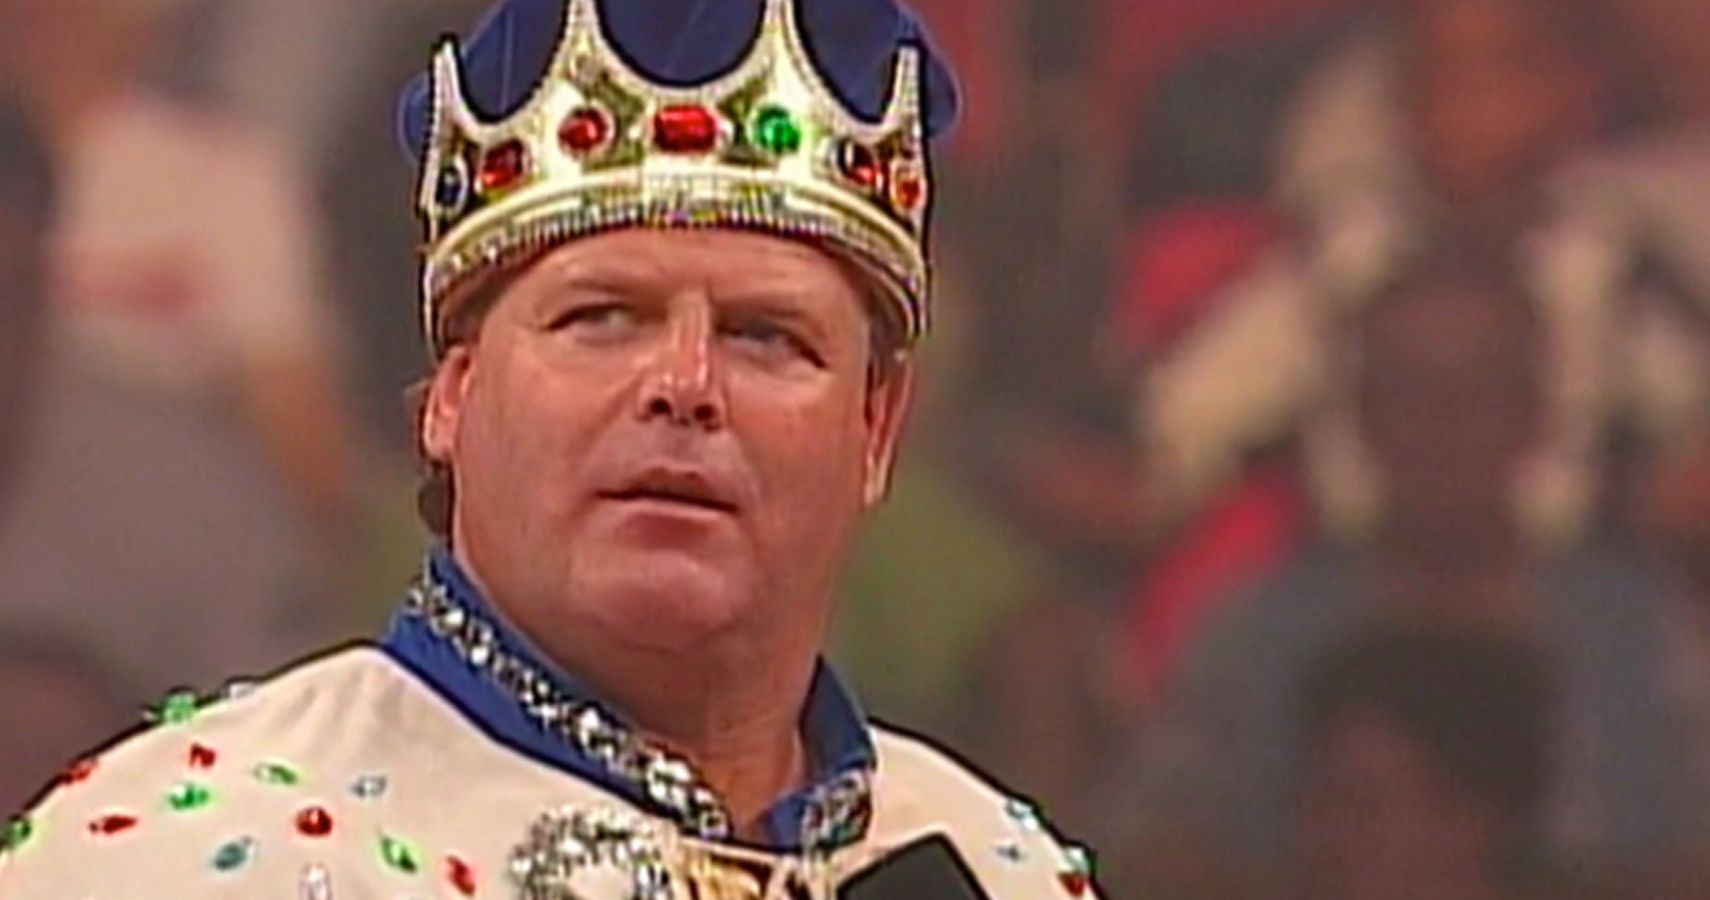 Jerry Lawler in the ring